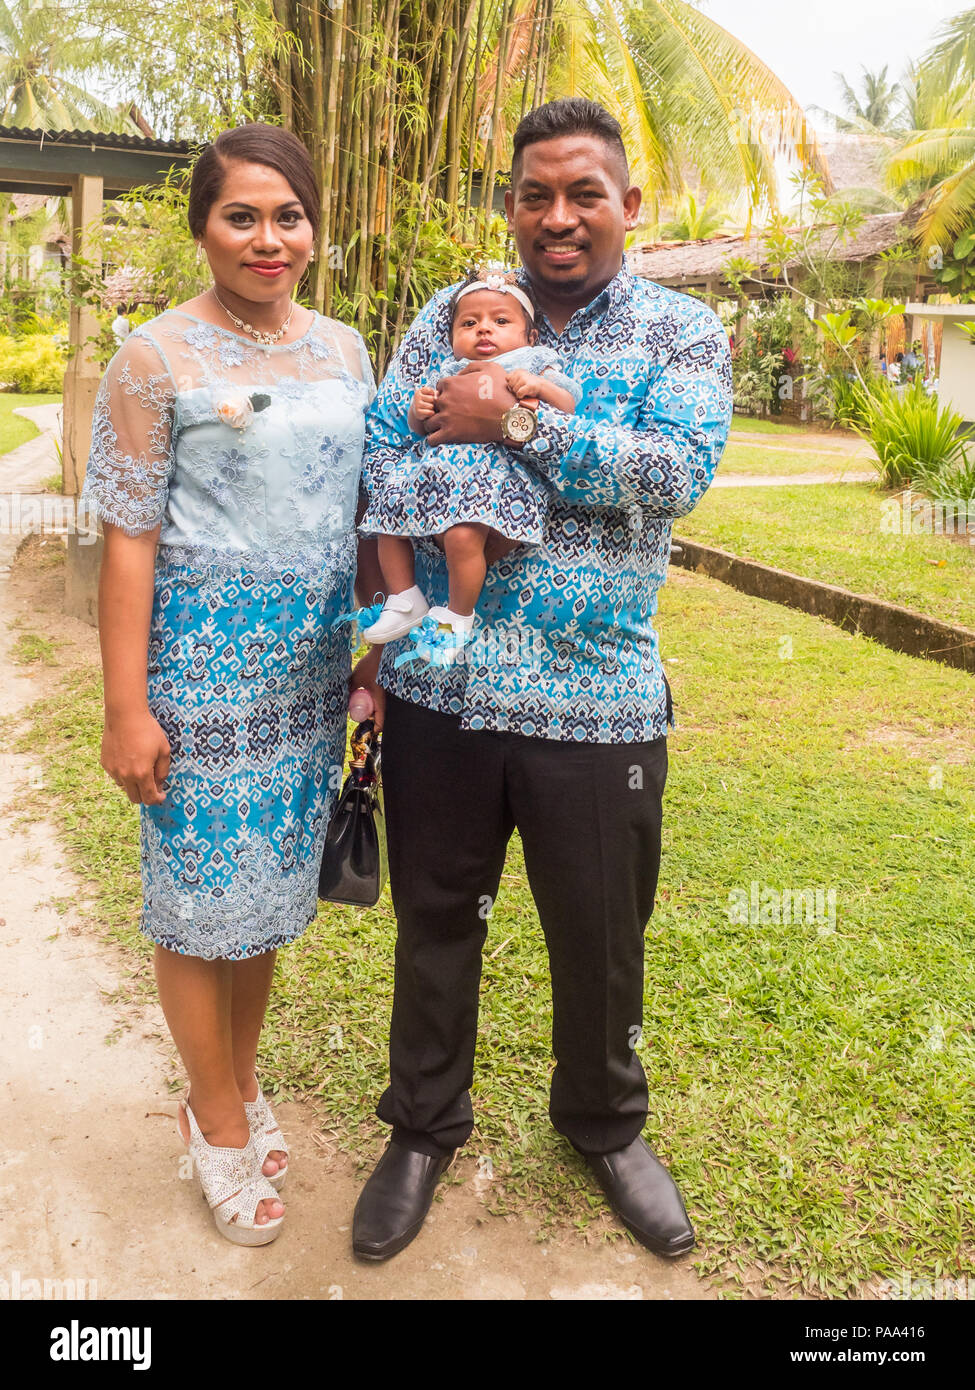 Ambon, Indonesia - February 10, 2018: Portrait of Indonesian family ready for the weeding party at the luxury resort of tropical Island, Ambon, Maluki Stock Photo